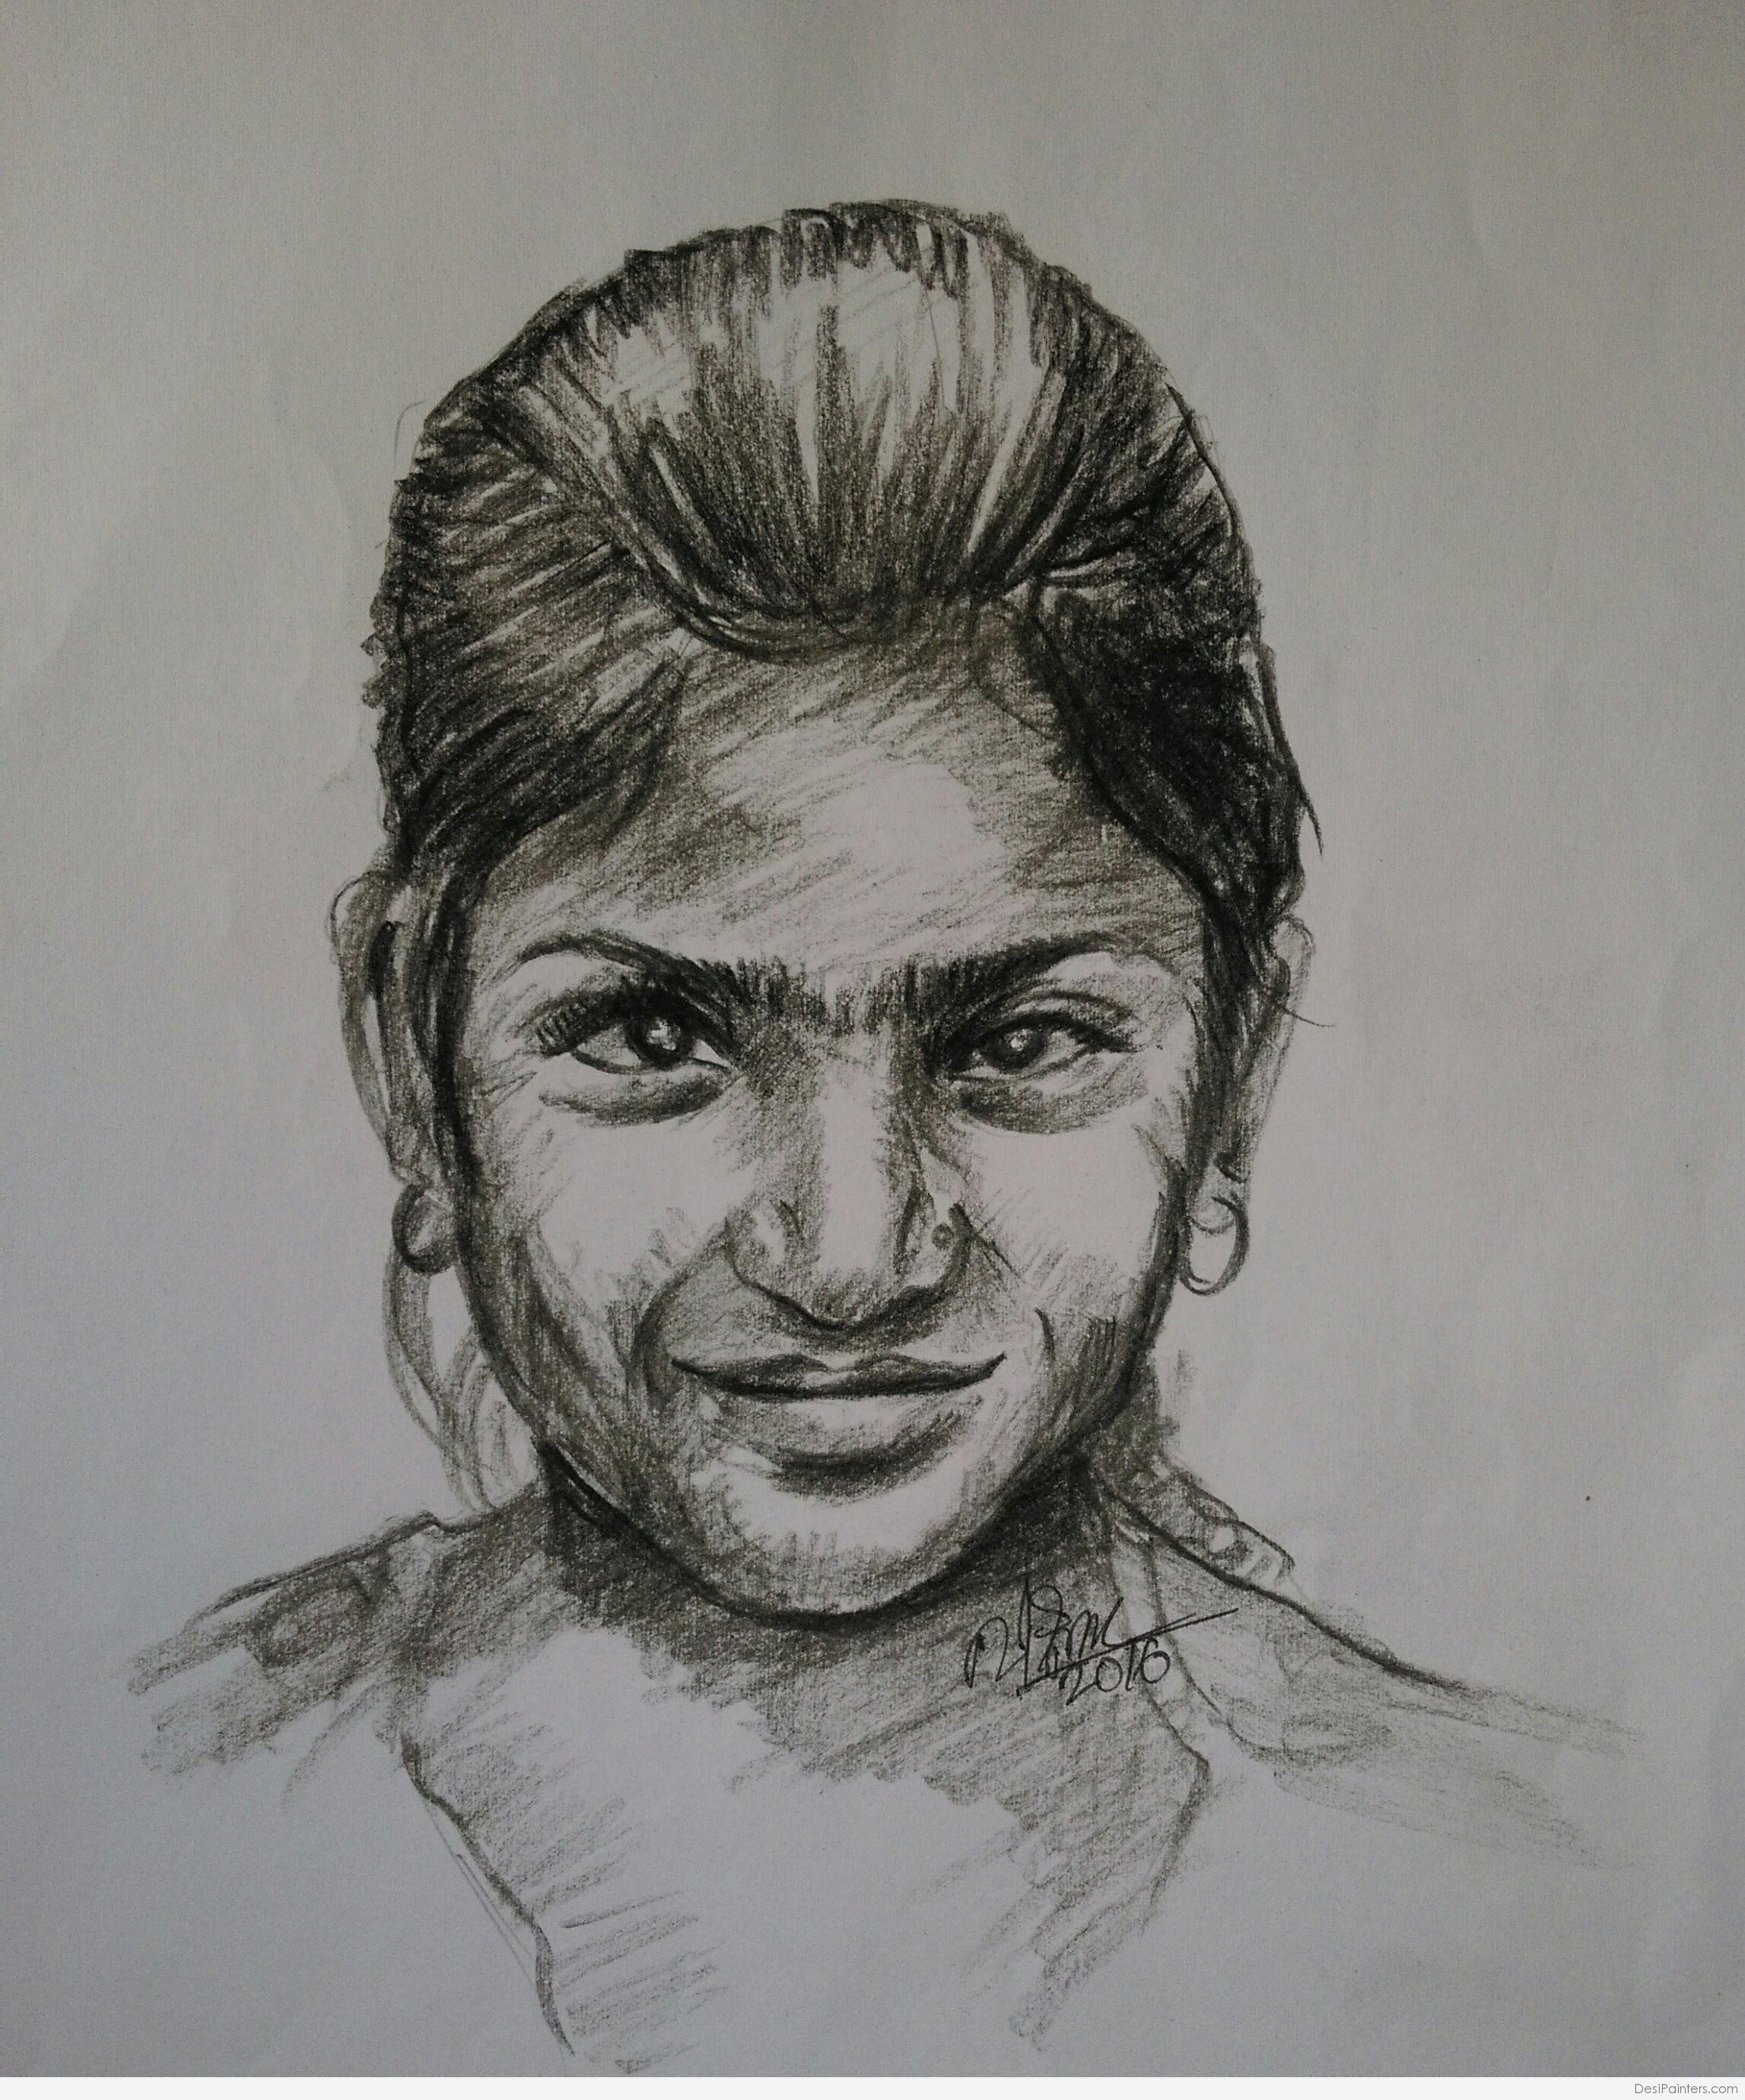 Draw a girl || Face Drawing || Pencil Sketch. : r/drawing